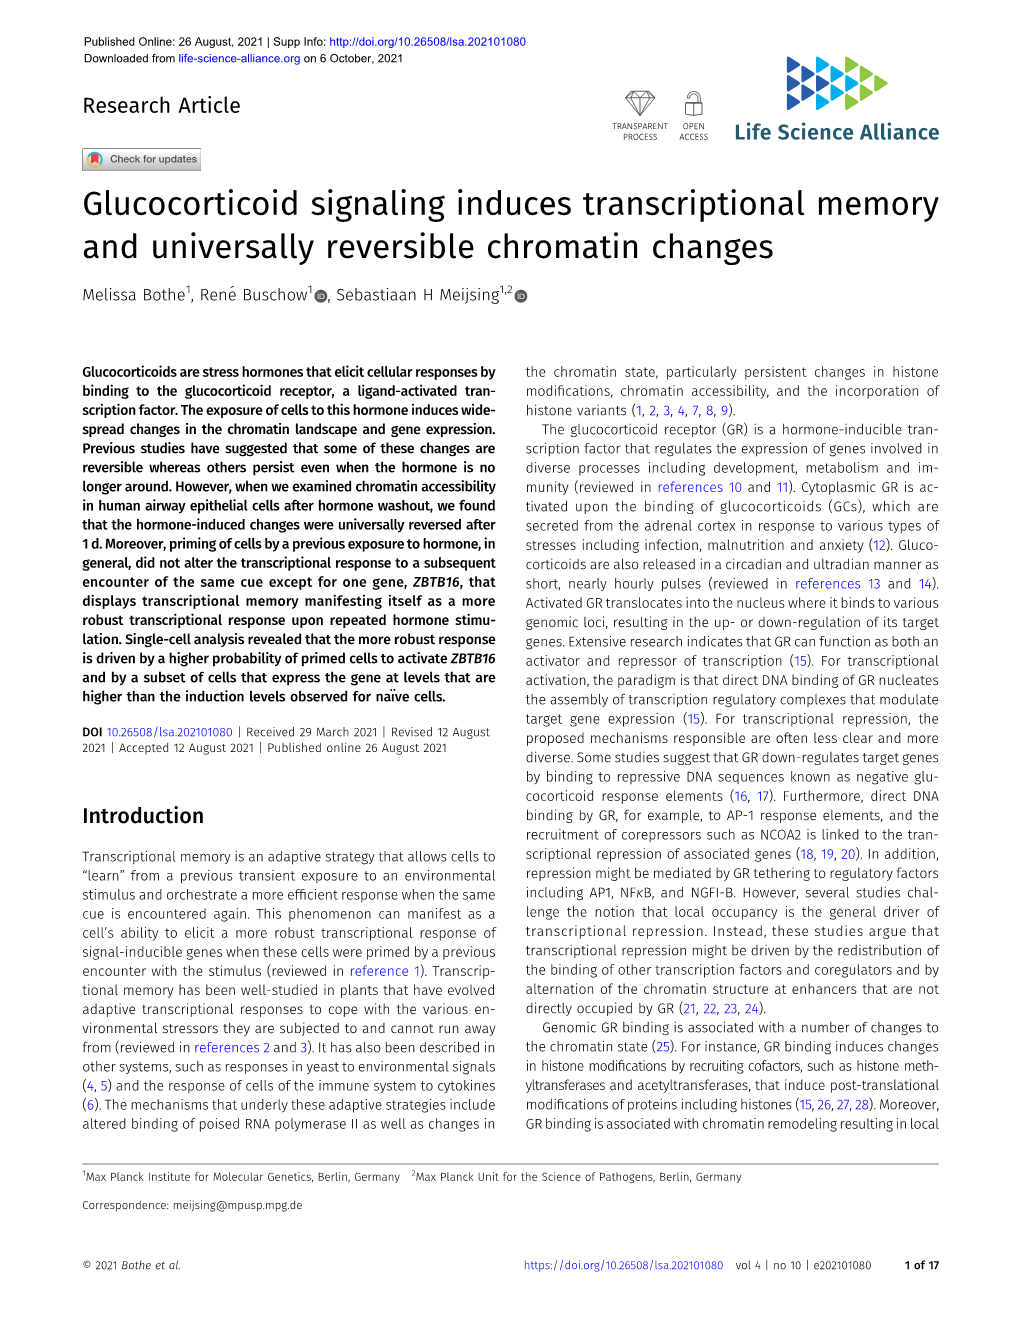 Glucocorticoid Signaling Induces Transcriptional Memory and Universally Reversible Chromatin Changes